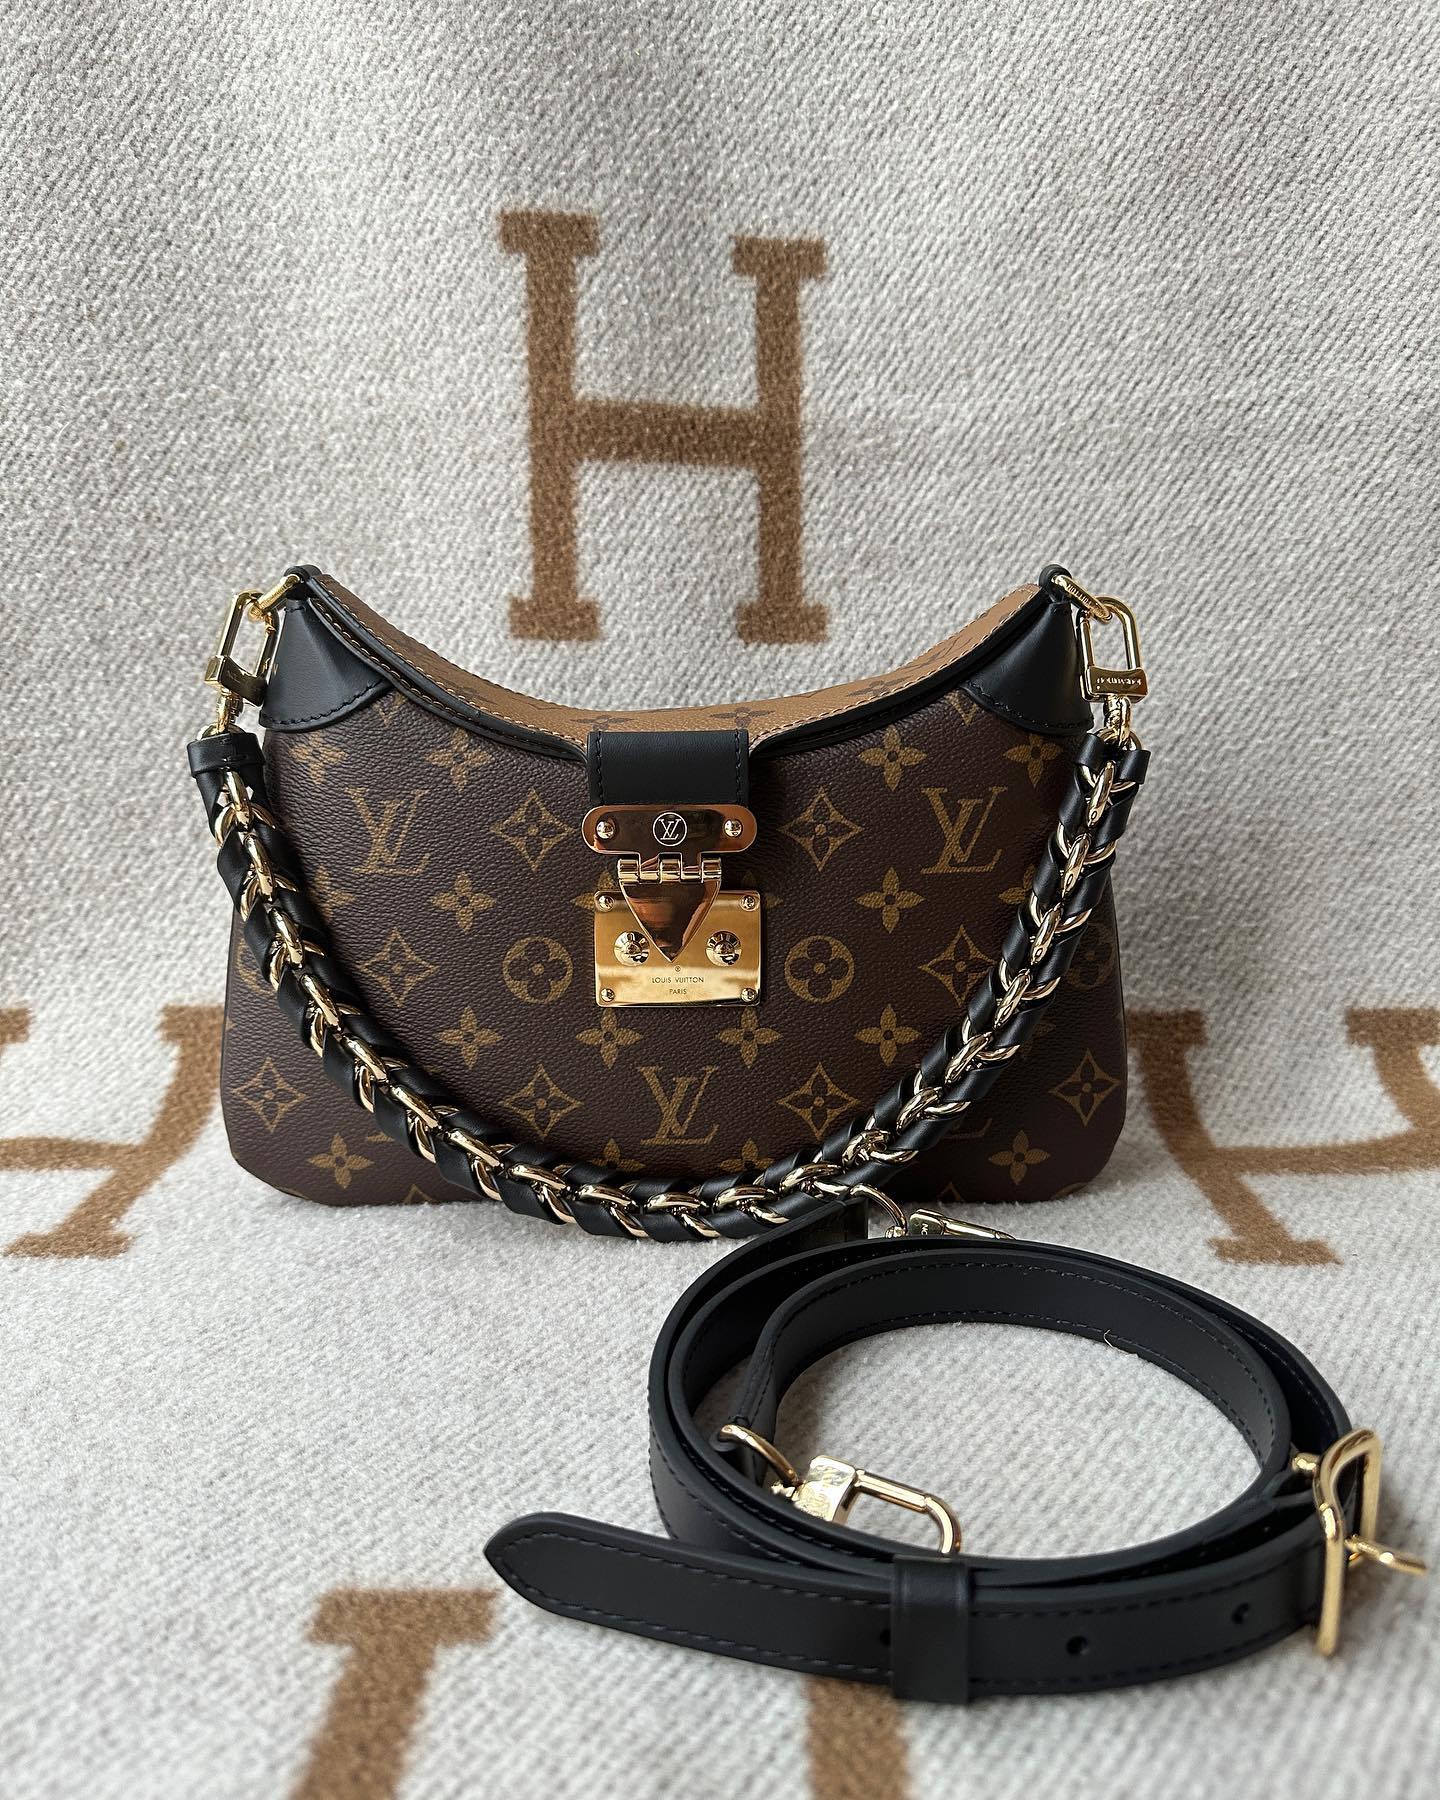 LV trio messenger bag for 250¥. Shipping took 12 days to canada with SAL.  Absolutely loved the quality. Feels very premium for the budget :  r/FashionReps